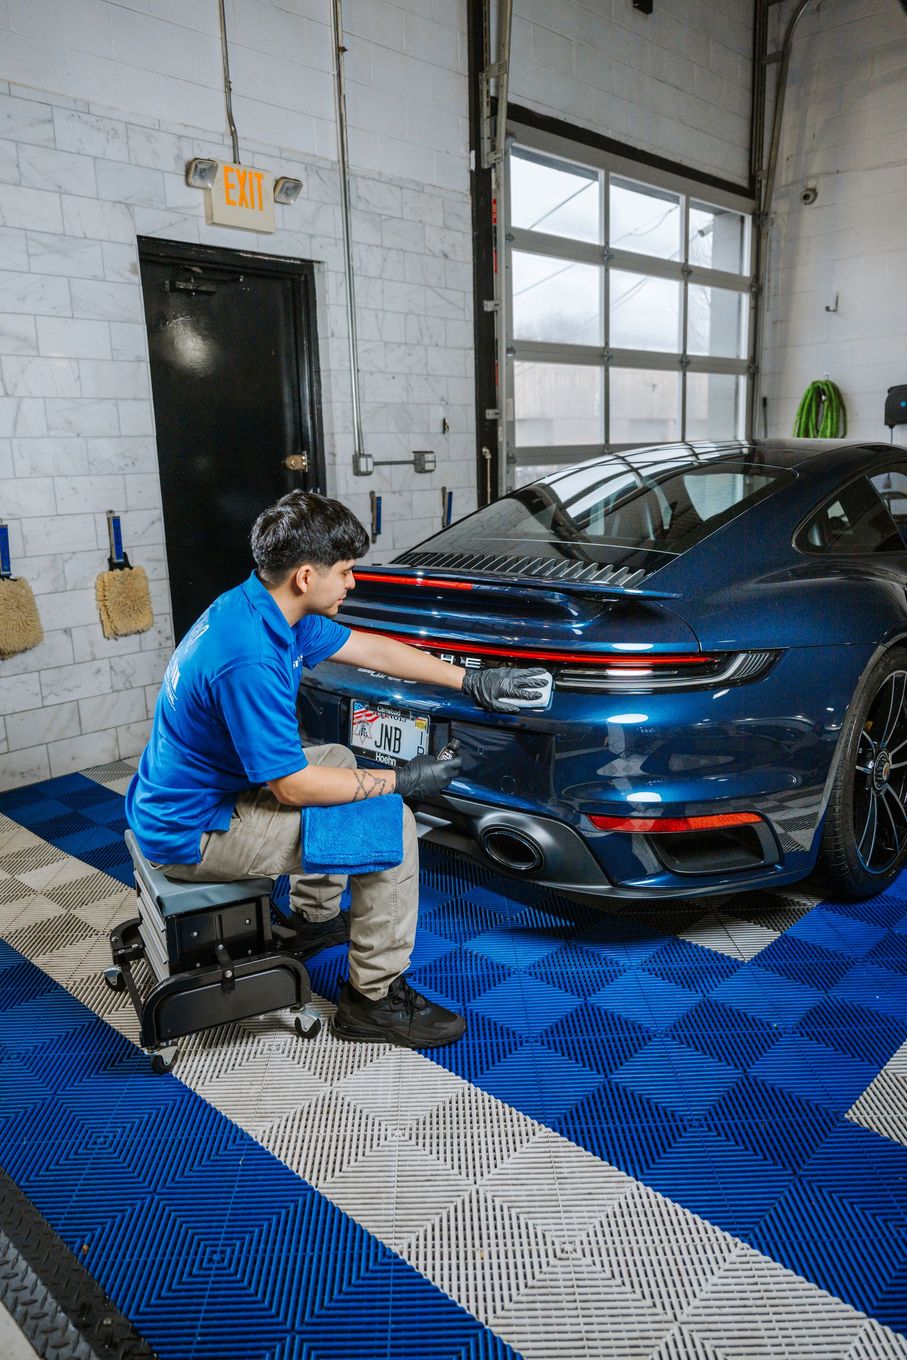 A man is sitting on a stool in front of a blue car in a garage.